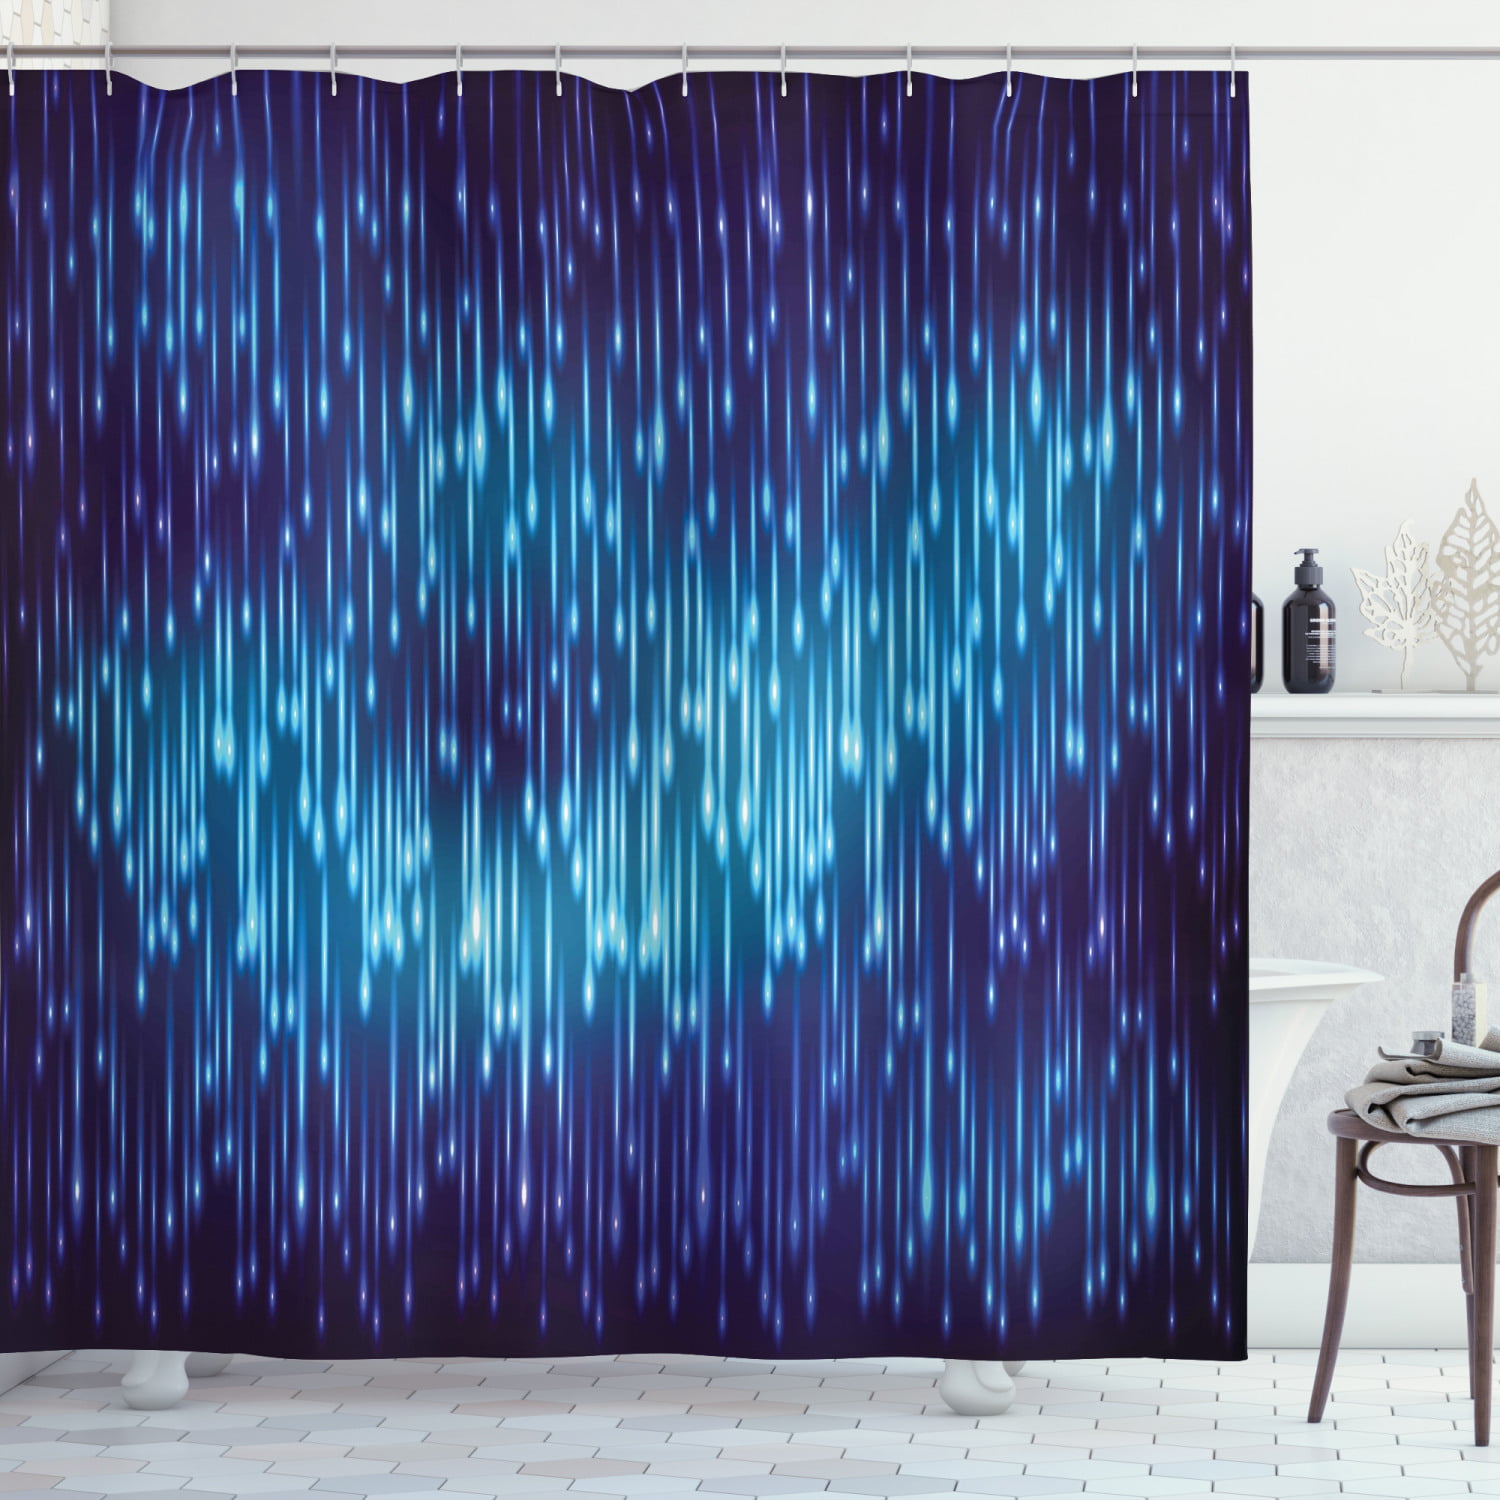 Blue Psychedelic Picture Bathroom Waterproof Fabric Shower Curtain 12 Hooks 